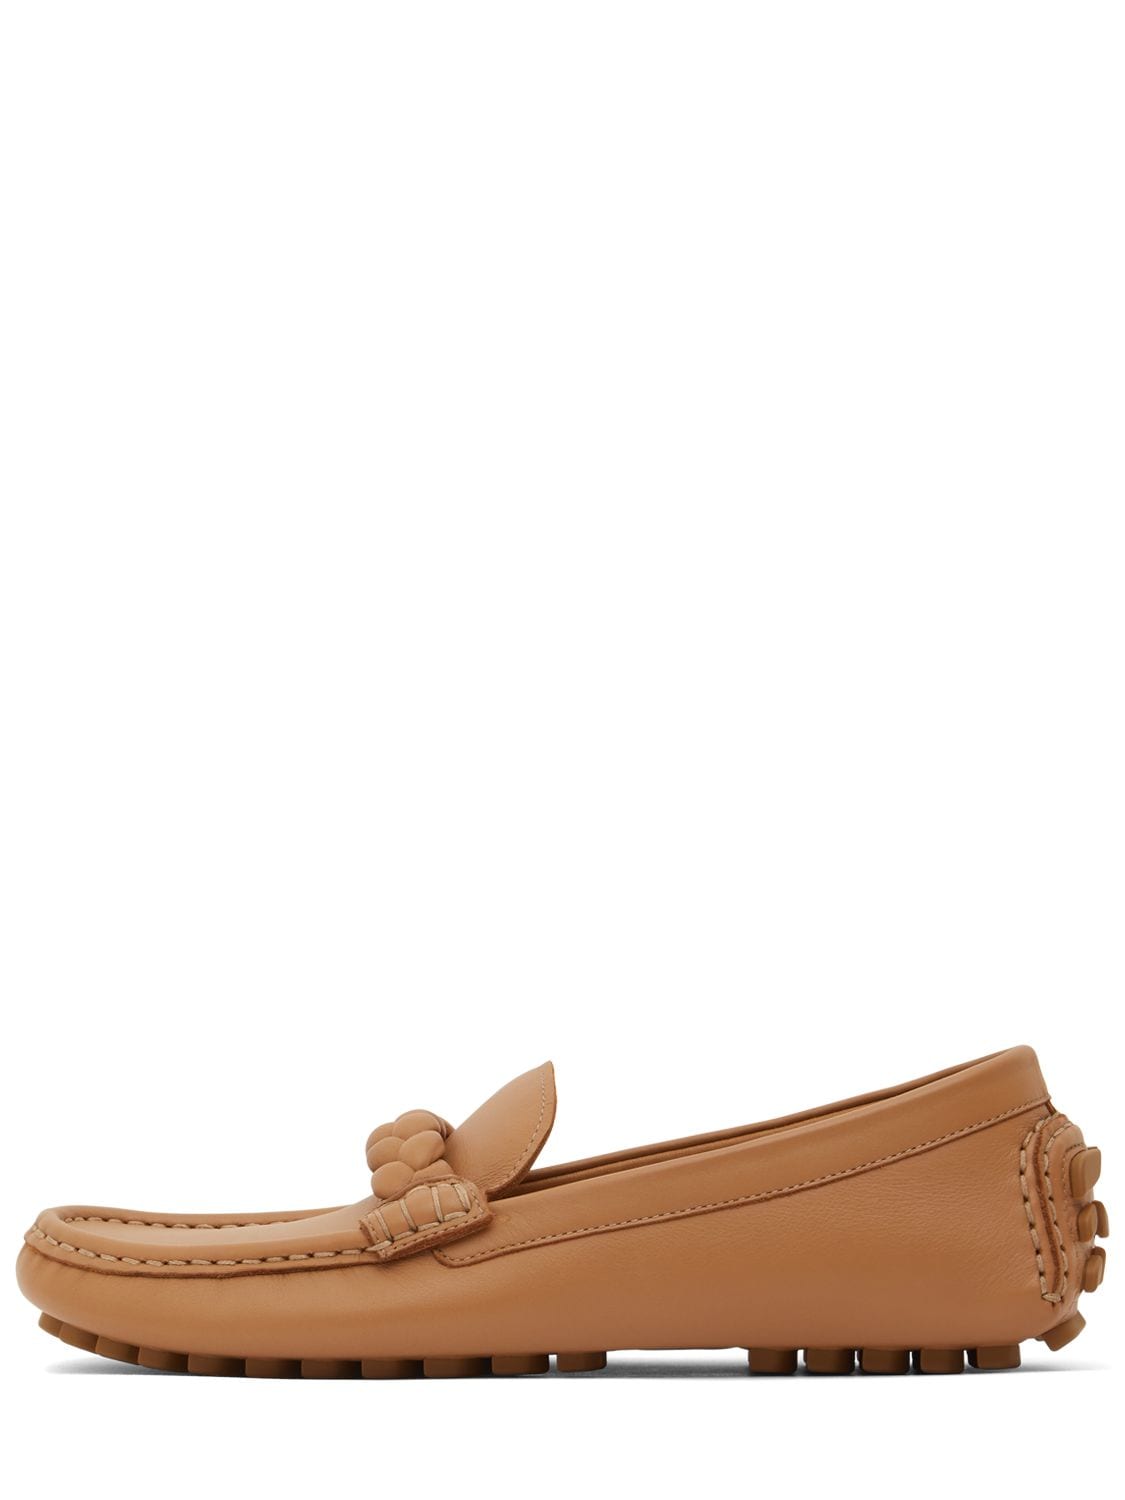 Gianvito Rossi 10mm Monza Leather Loafers In Tan